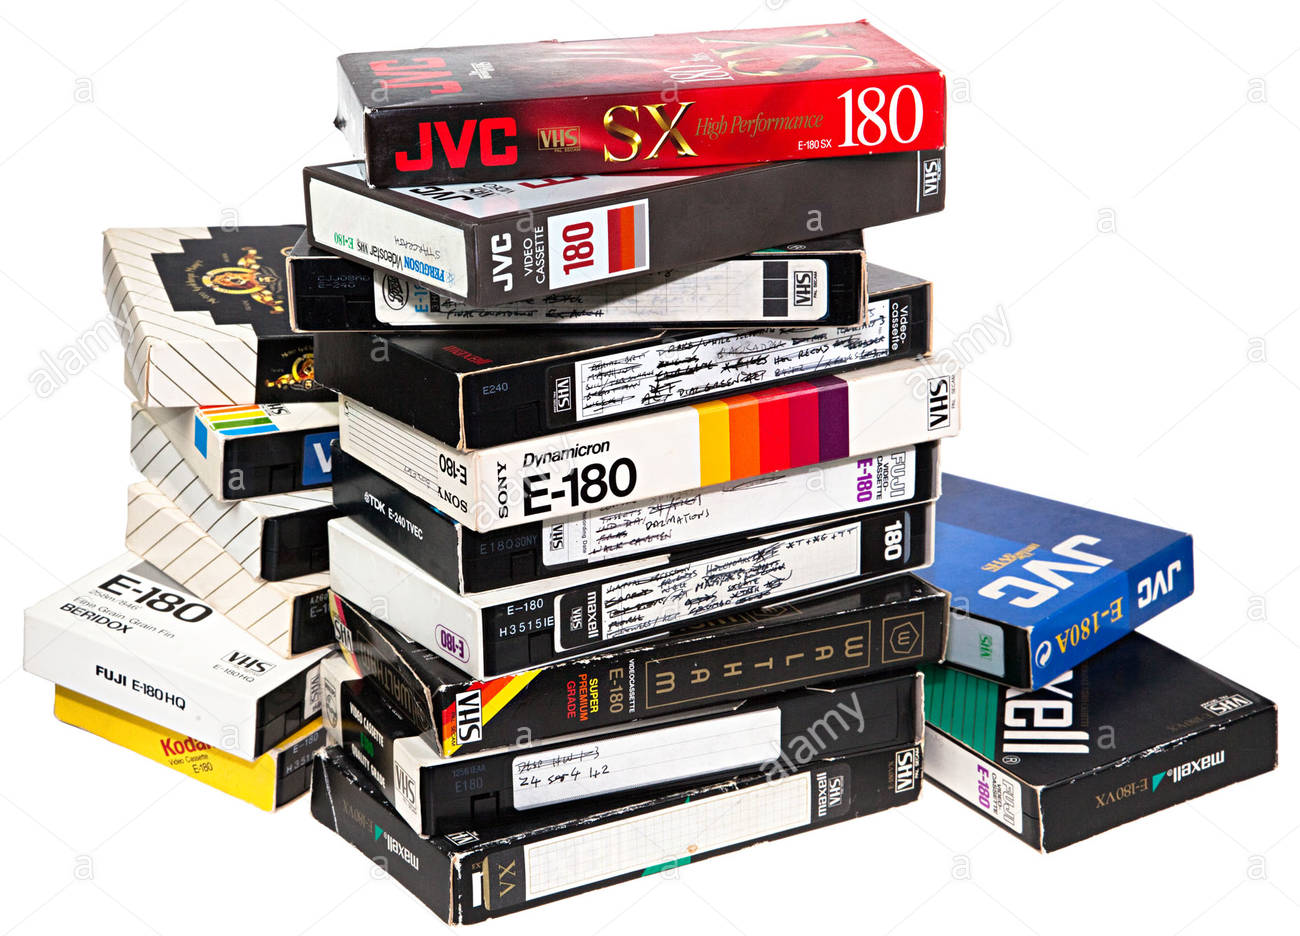 Wichita Events - Media Transfer and Digitizing Services Stack of VHS Family Movies.jpg